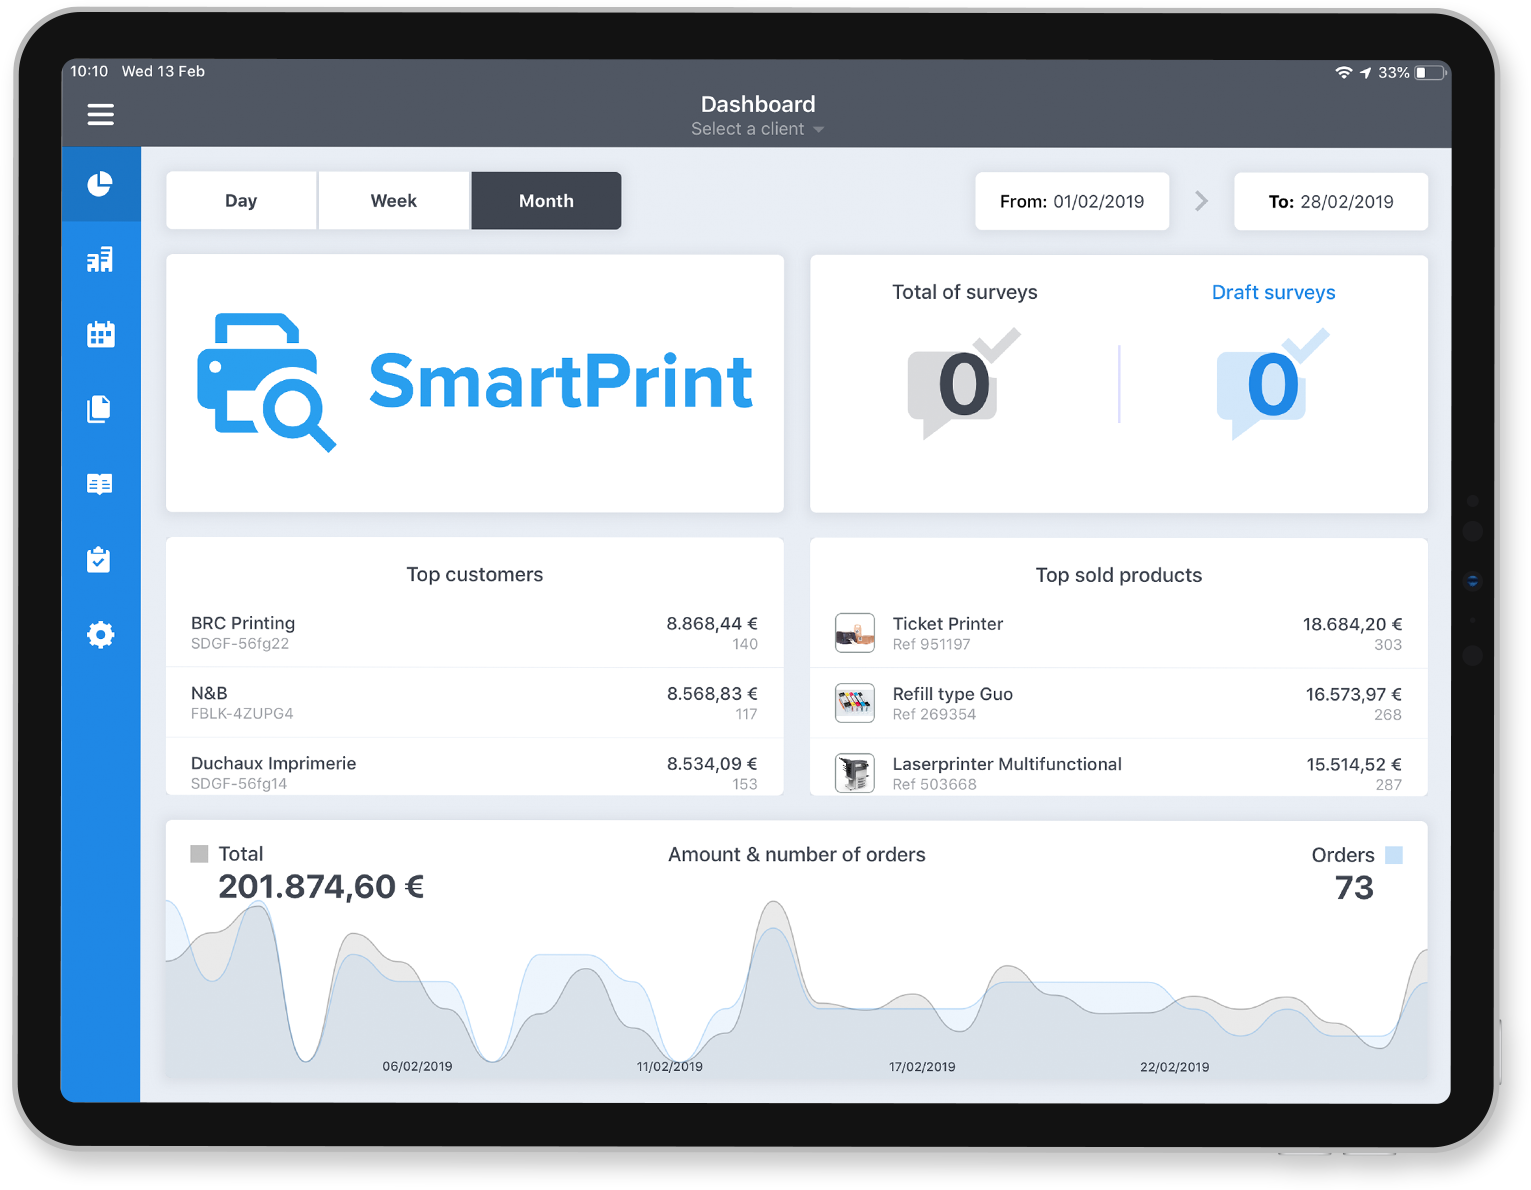 SmartSales Software - Get an overview of the state of your sales thanks to your dashboard.